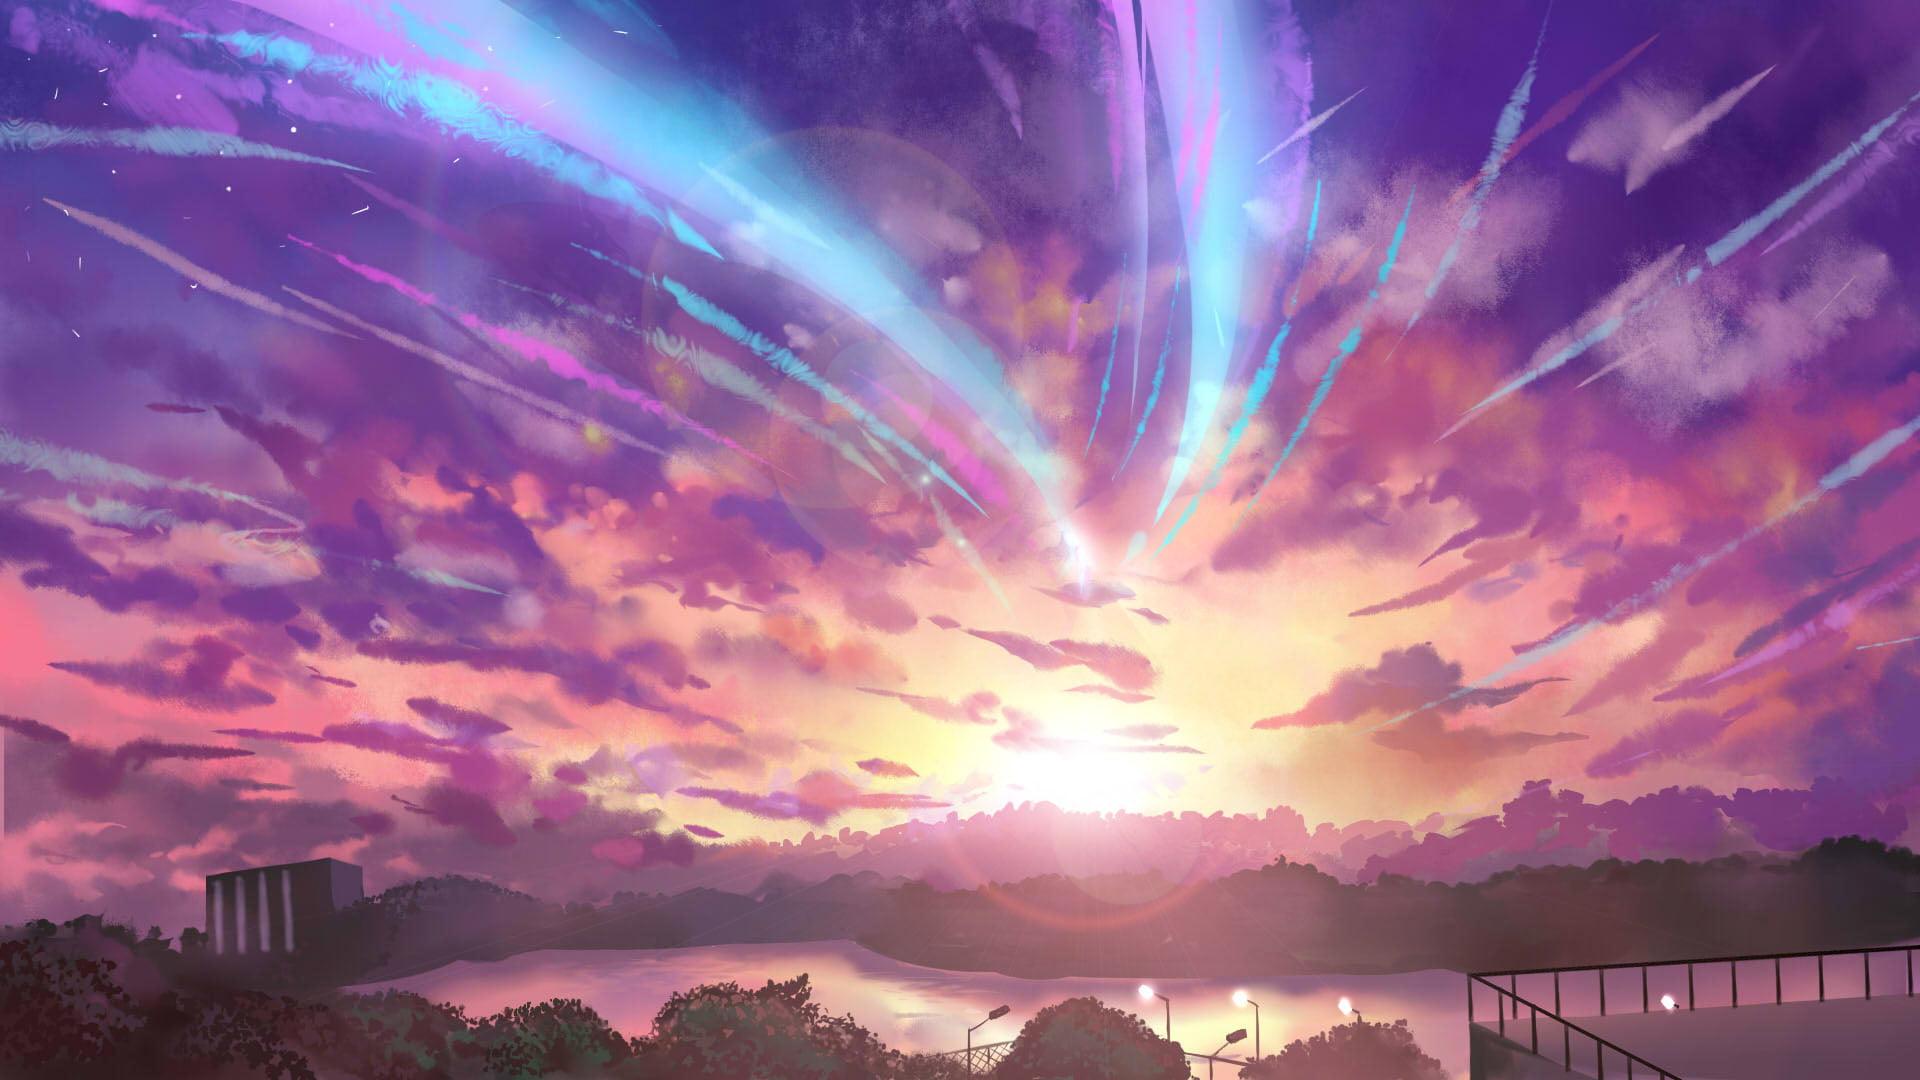 your name anime scenery